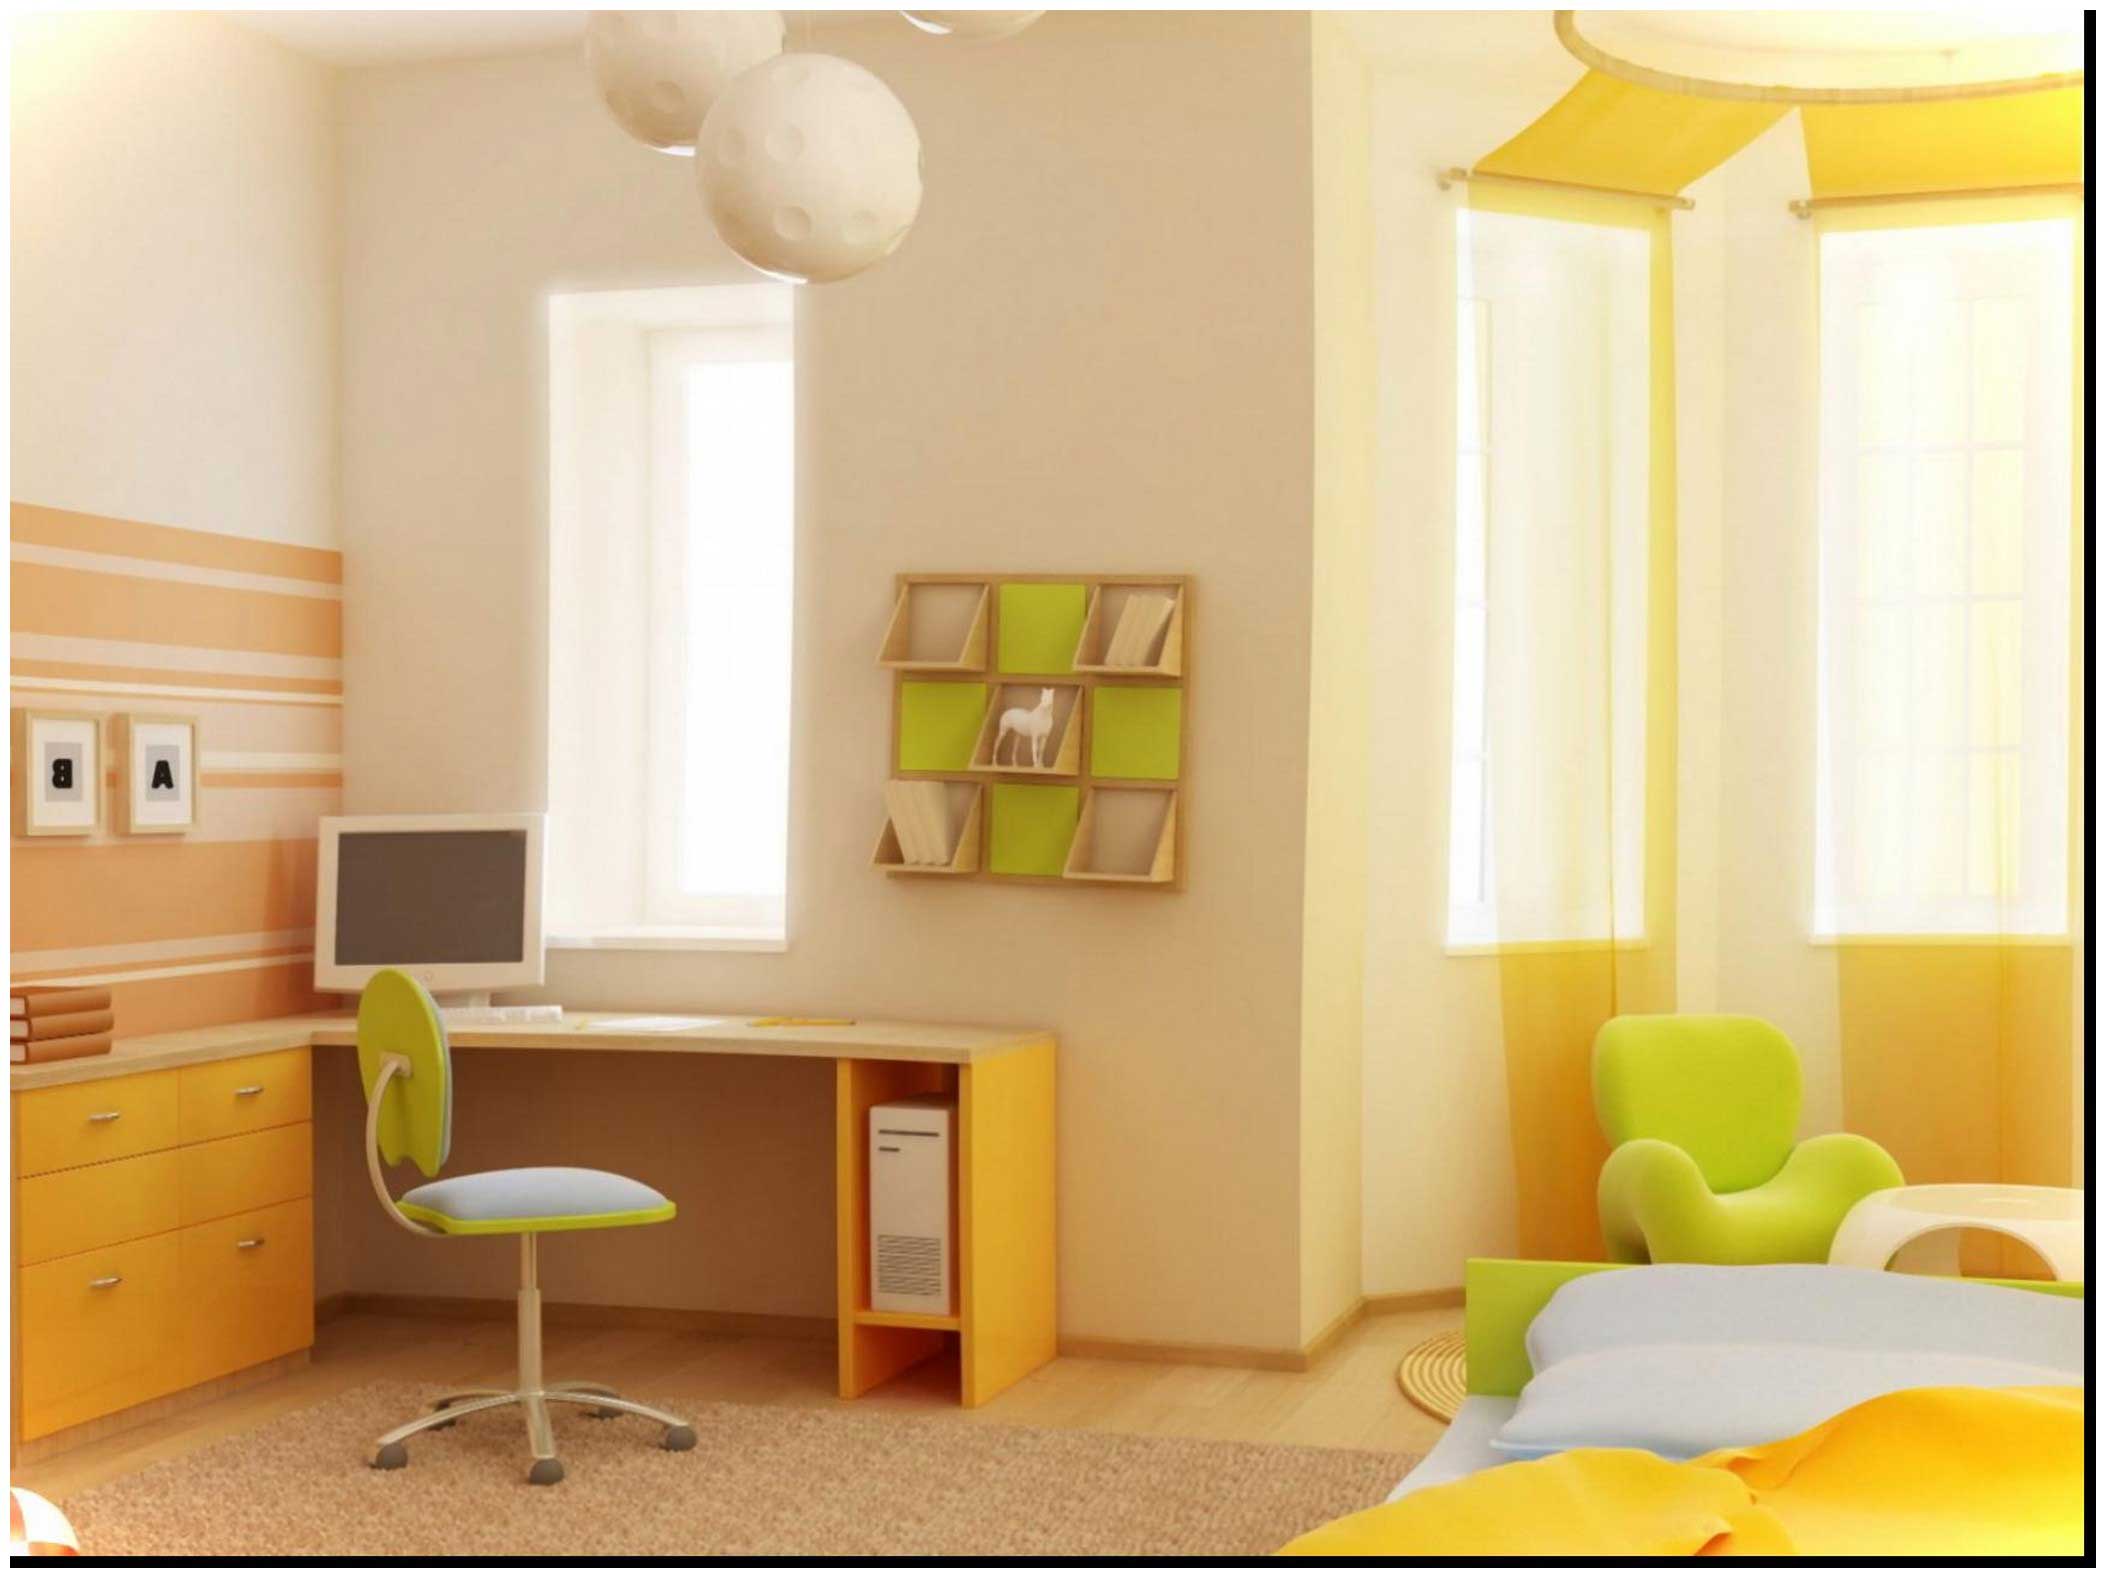 Asian Paints Yellow Shades For Living Room